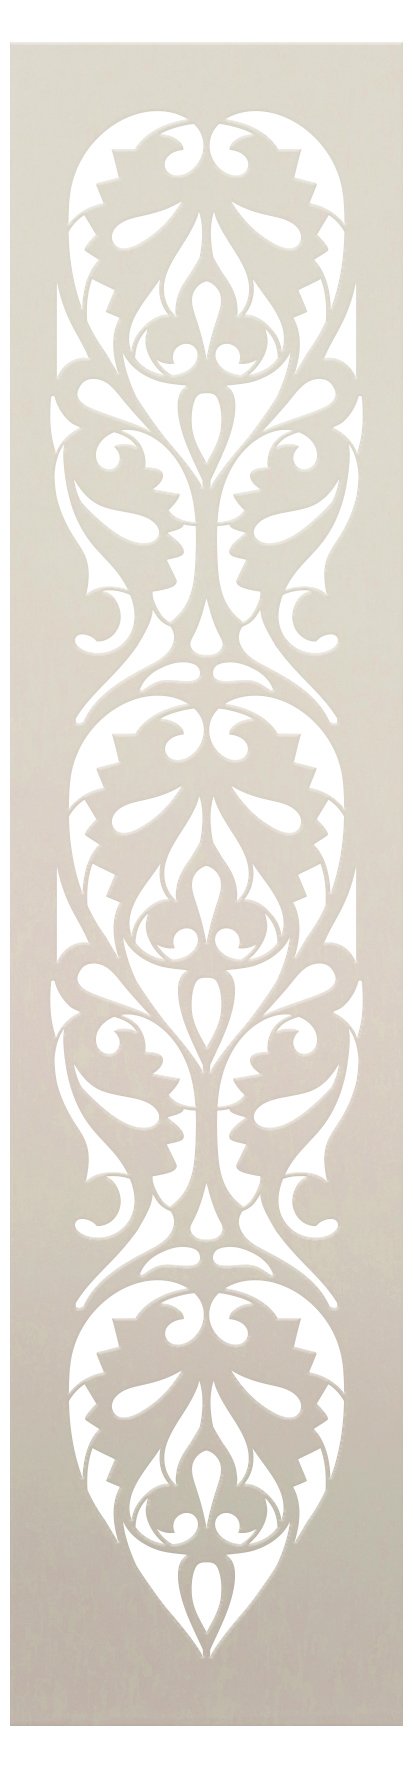 Egyptian Ornamental Leaf Band Stencil by StudioR12 | Craft DIY Repeating Pattern Home Decor | Paint Wood Sign | Reusable Mylar Template | Select Size | STCL5800